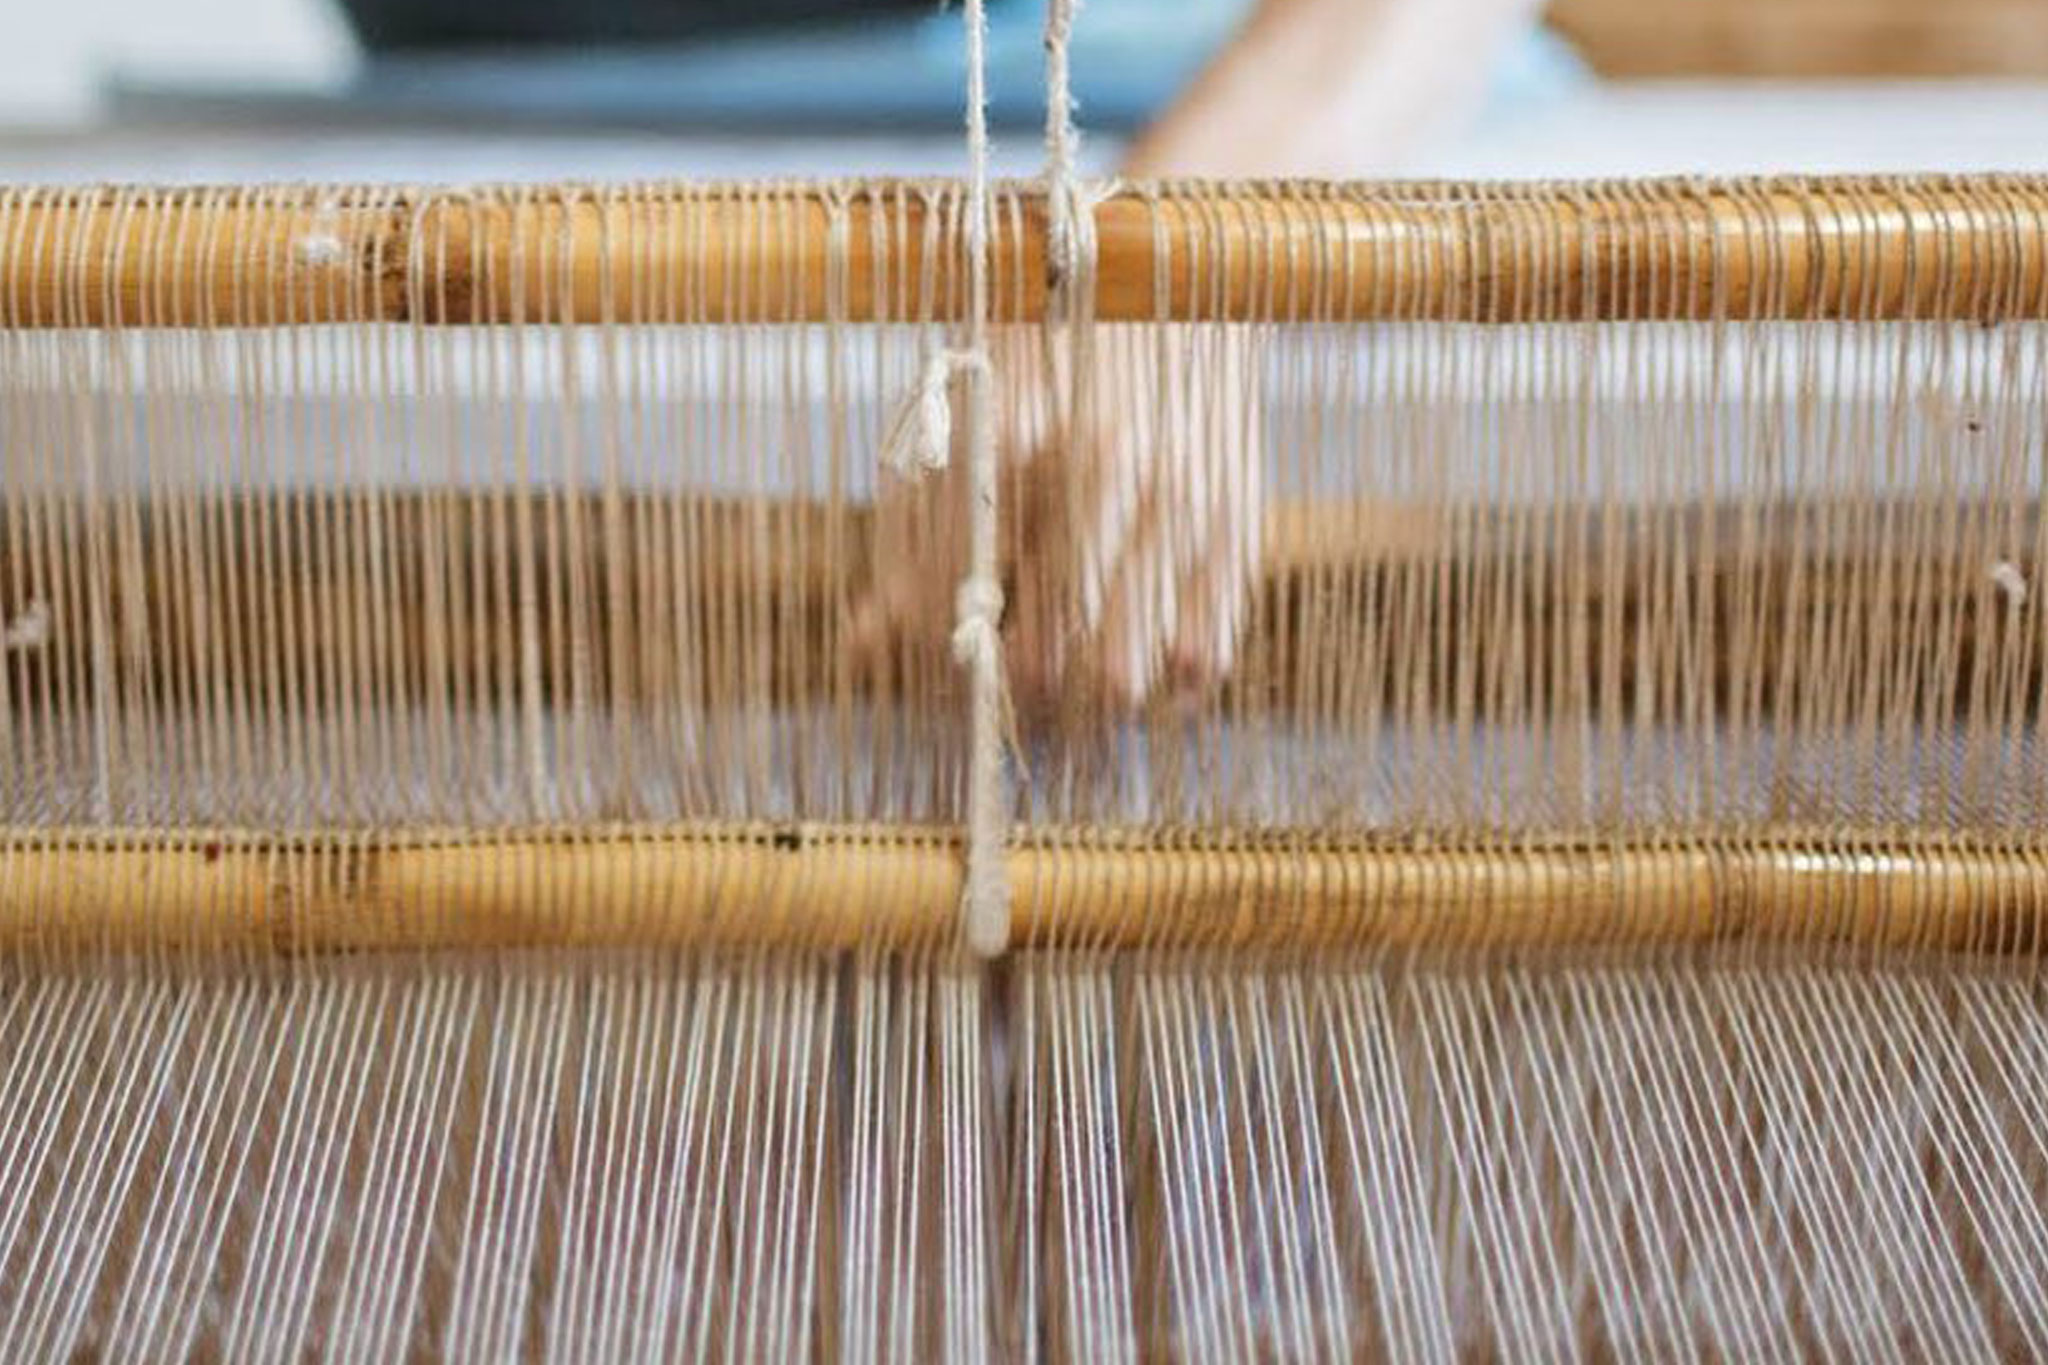 Picture of a loom at work.